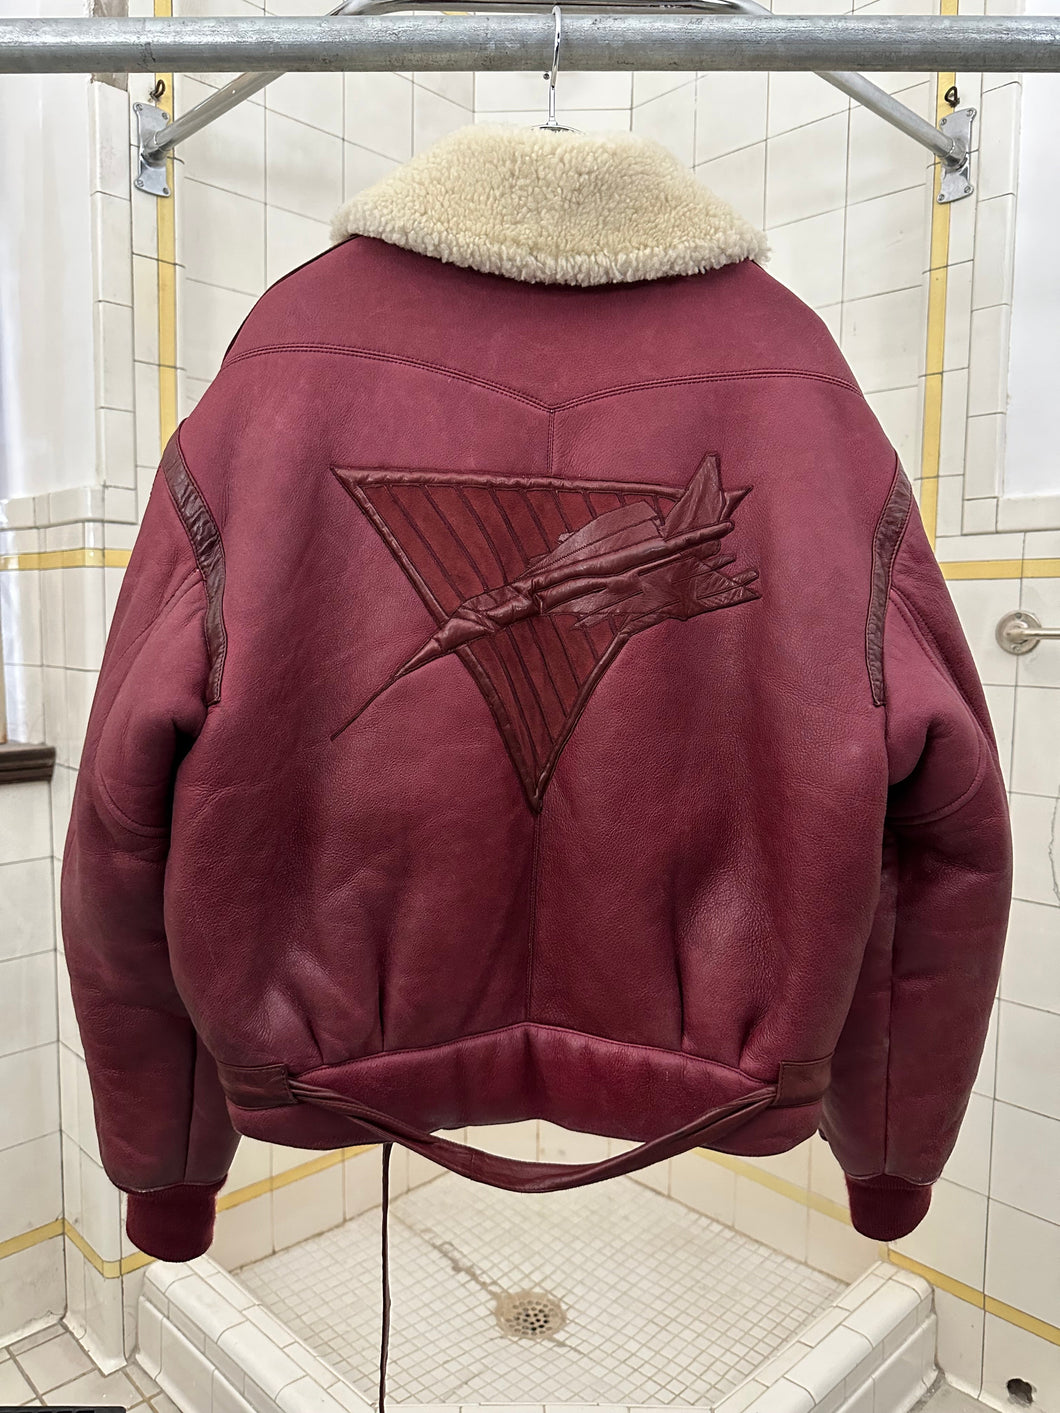 aw1983 Claude Montana Red Fighter Jet Shearling Jacket - Size L